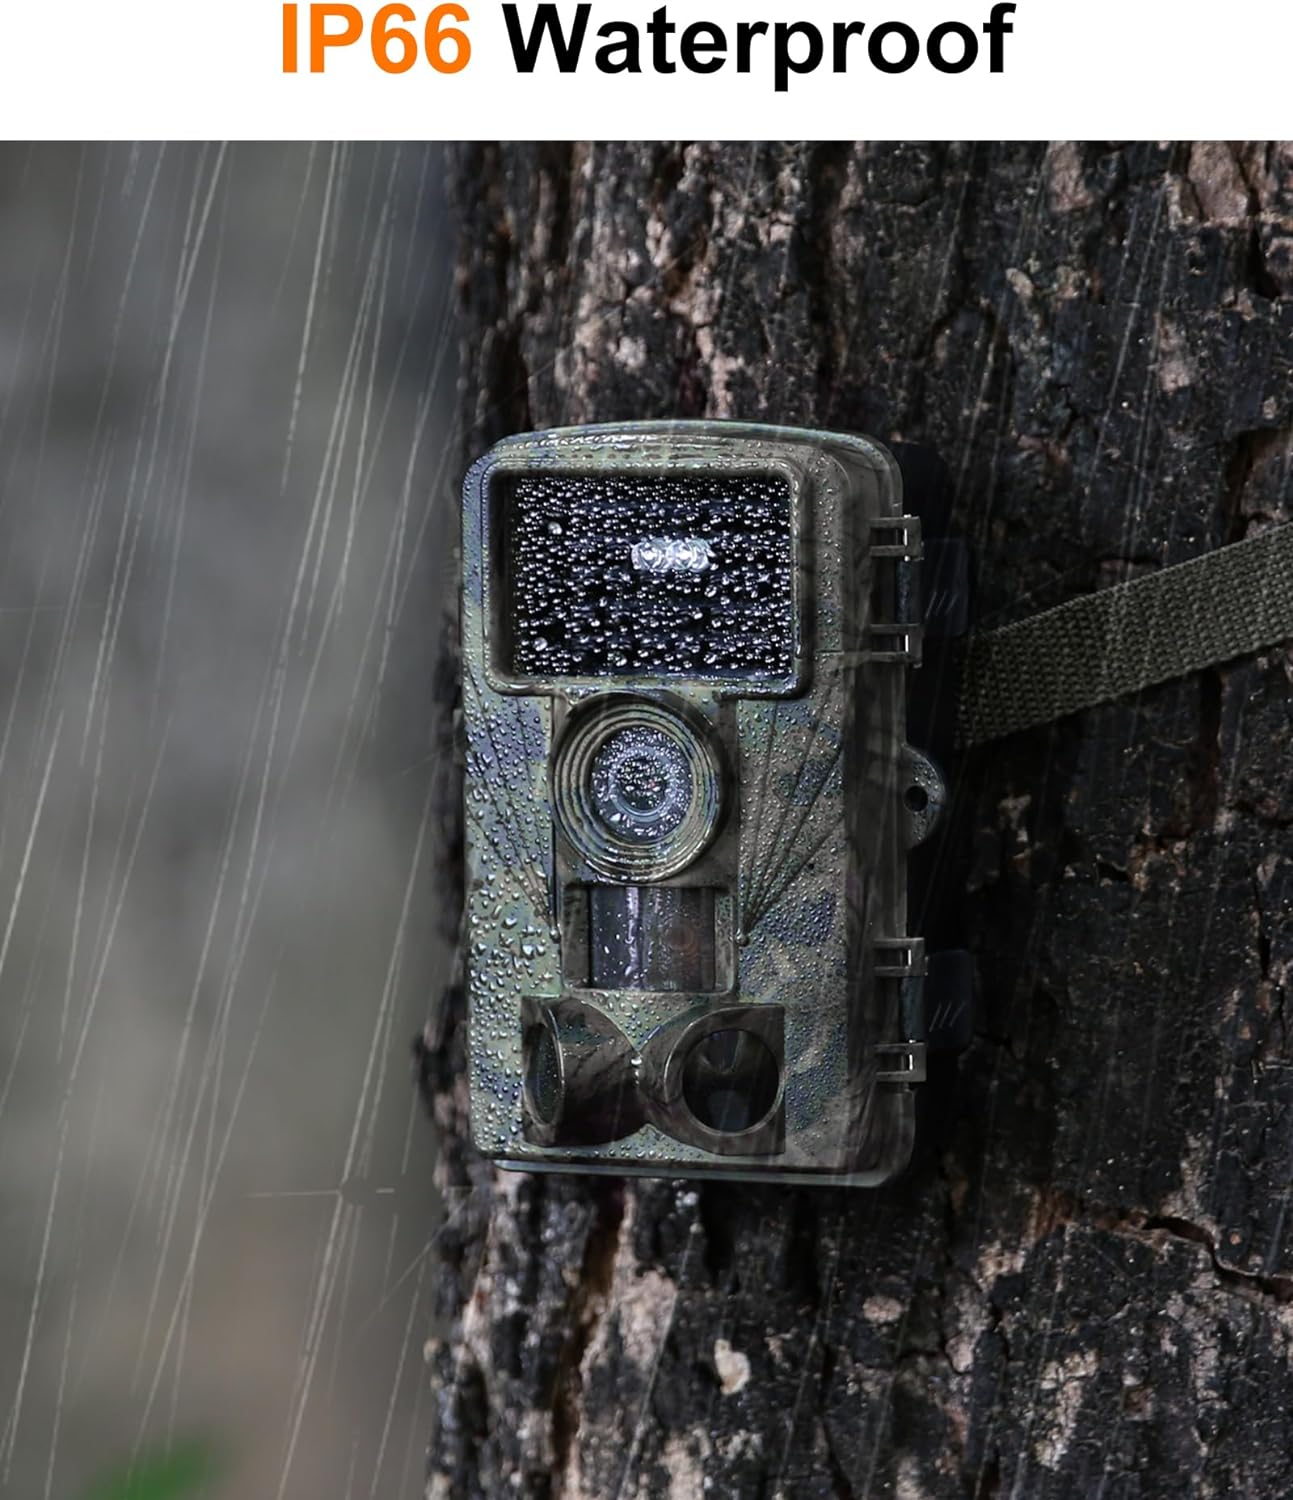 Trail Camera - 4K 48MP Game Camera with Night Vision, 0.05s Trigger Motion Activated Hunting Camera, IP66 Waterproof, 130°Wide-Angle with 46pcs No Glow Infrared Leds for Outdoor Wildlife Monitoring.